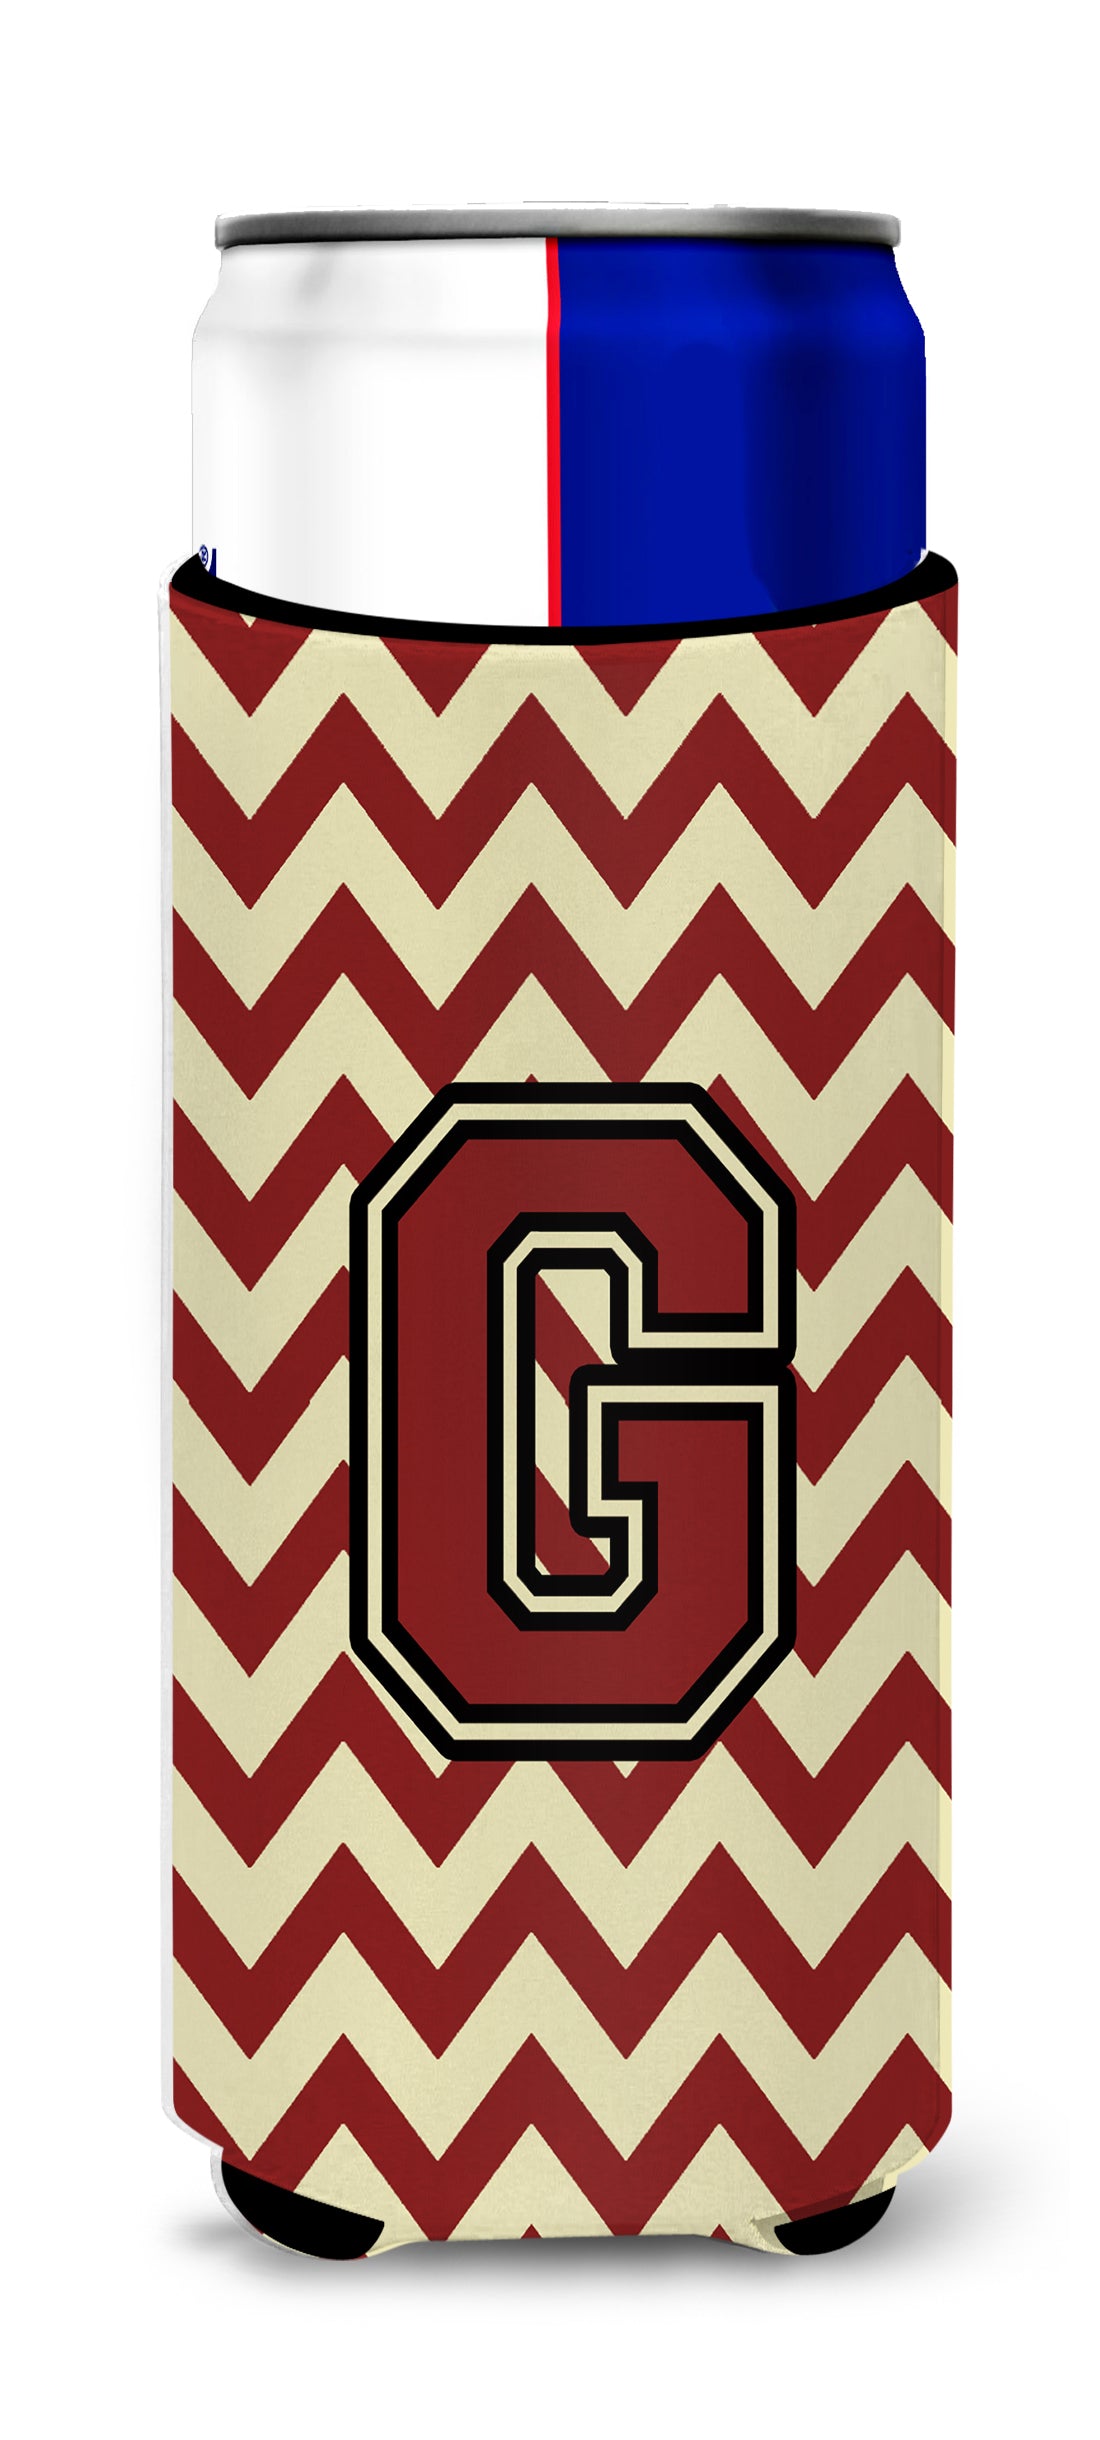 Letter G Chevron Maroon and Gold Ultra Beverage Insulators for slim cans CJ1061-GMUK.